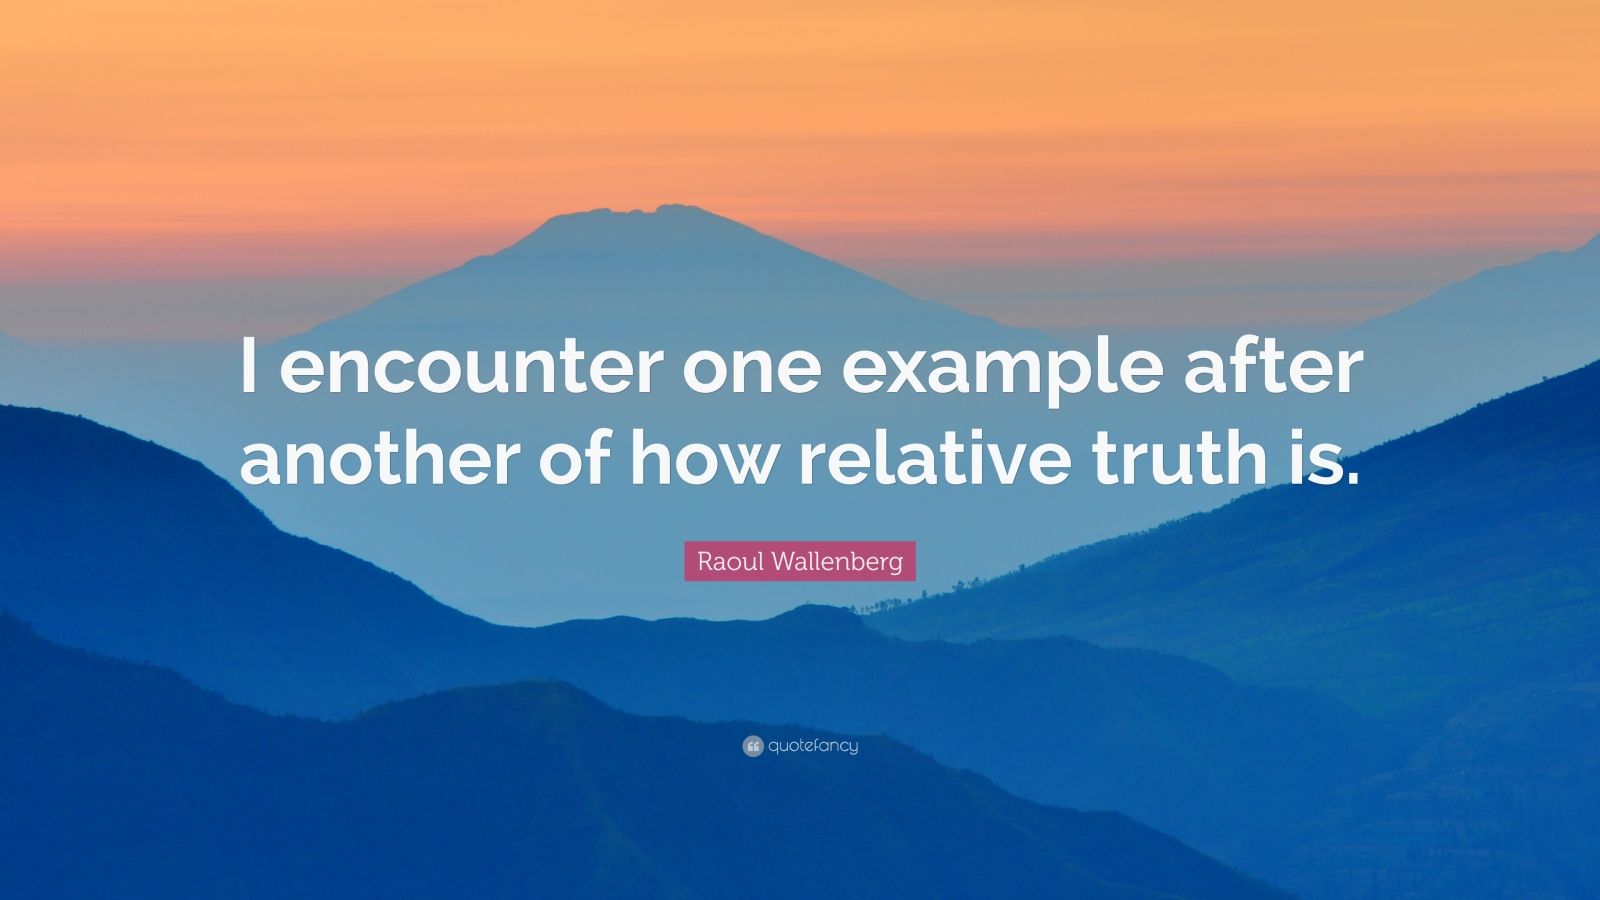 Raoul Wallenberg Quote: "I encounter one example after another of how relative truth is." (9 ...